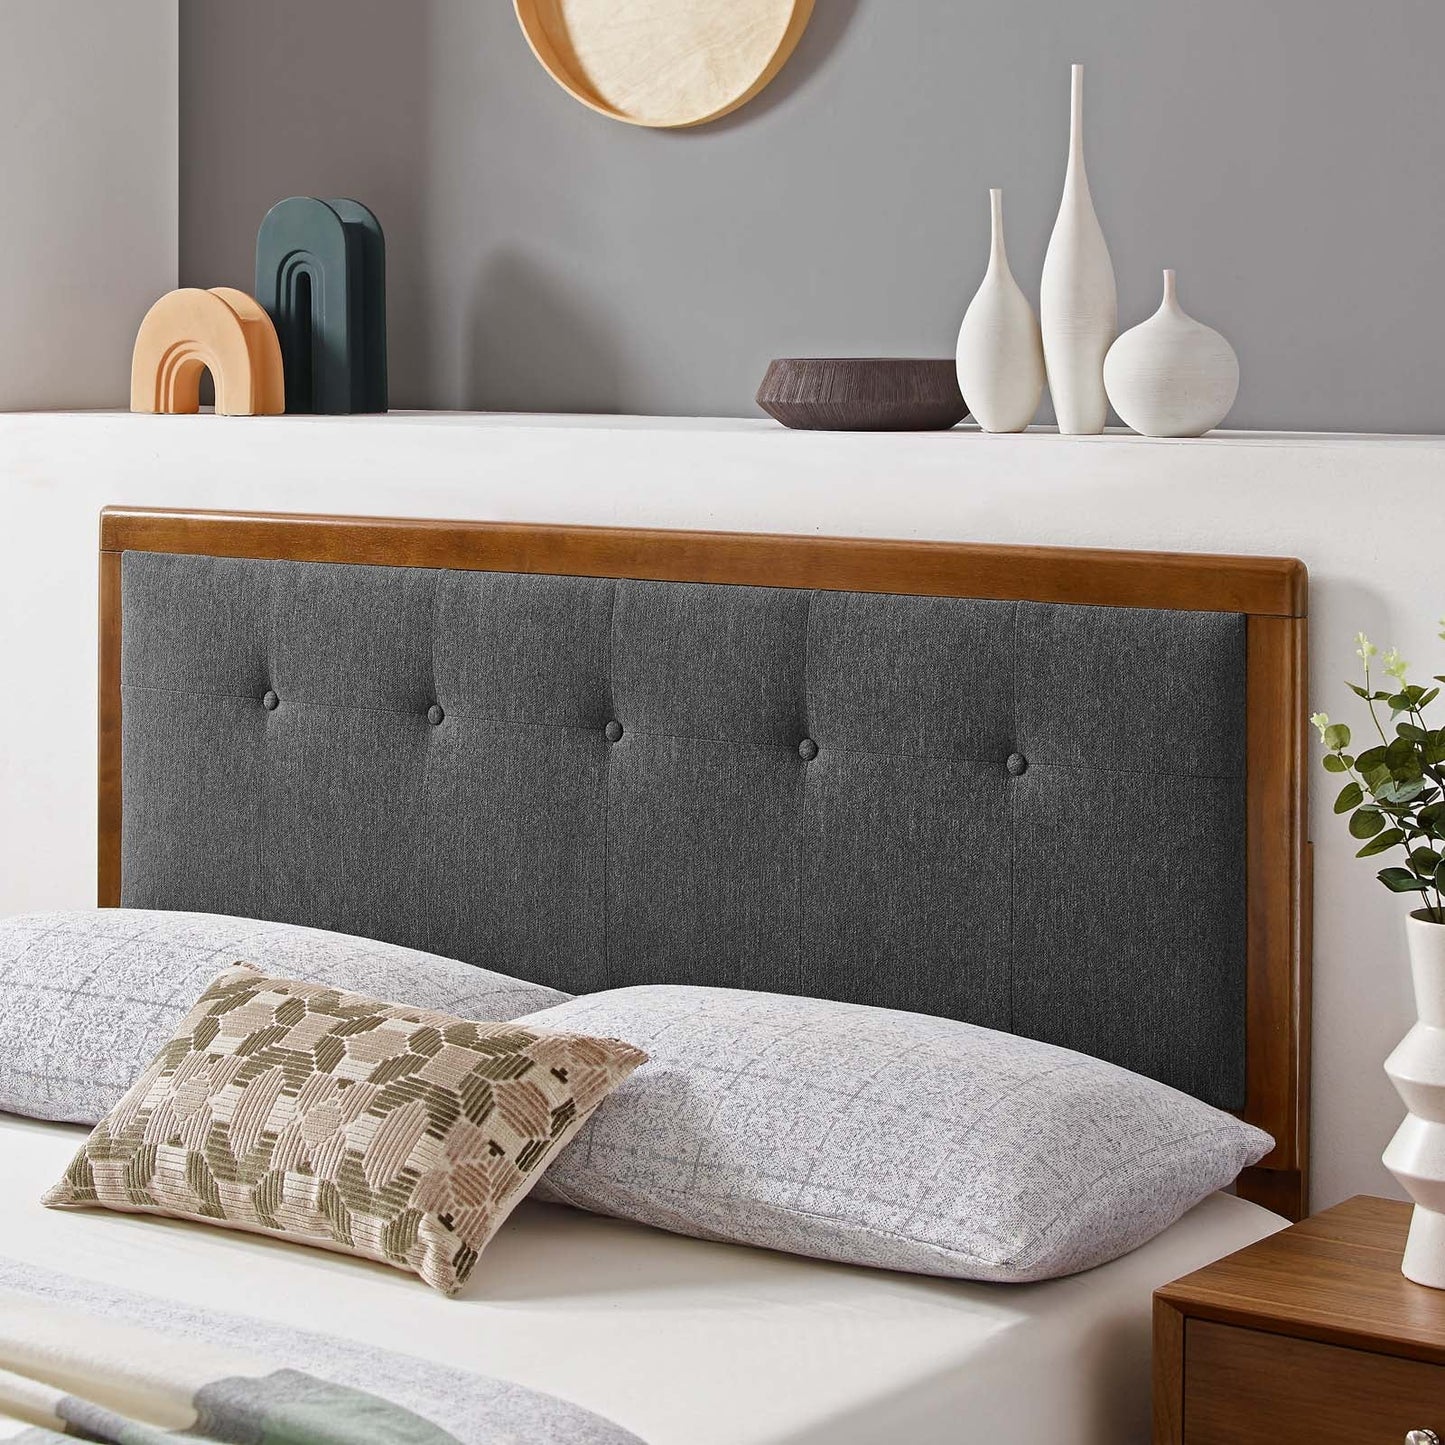 Dwayna Tufted Fabric and Wood Queen Headboard